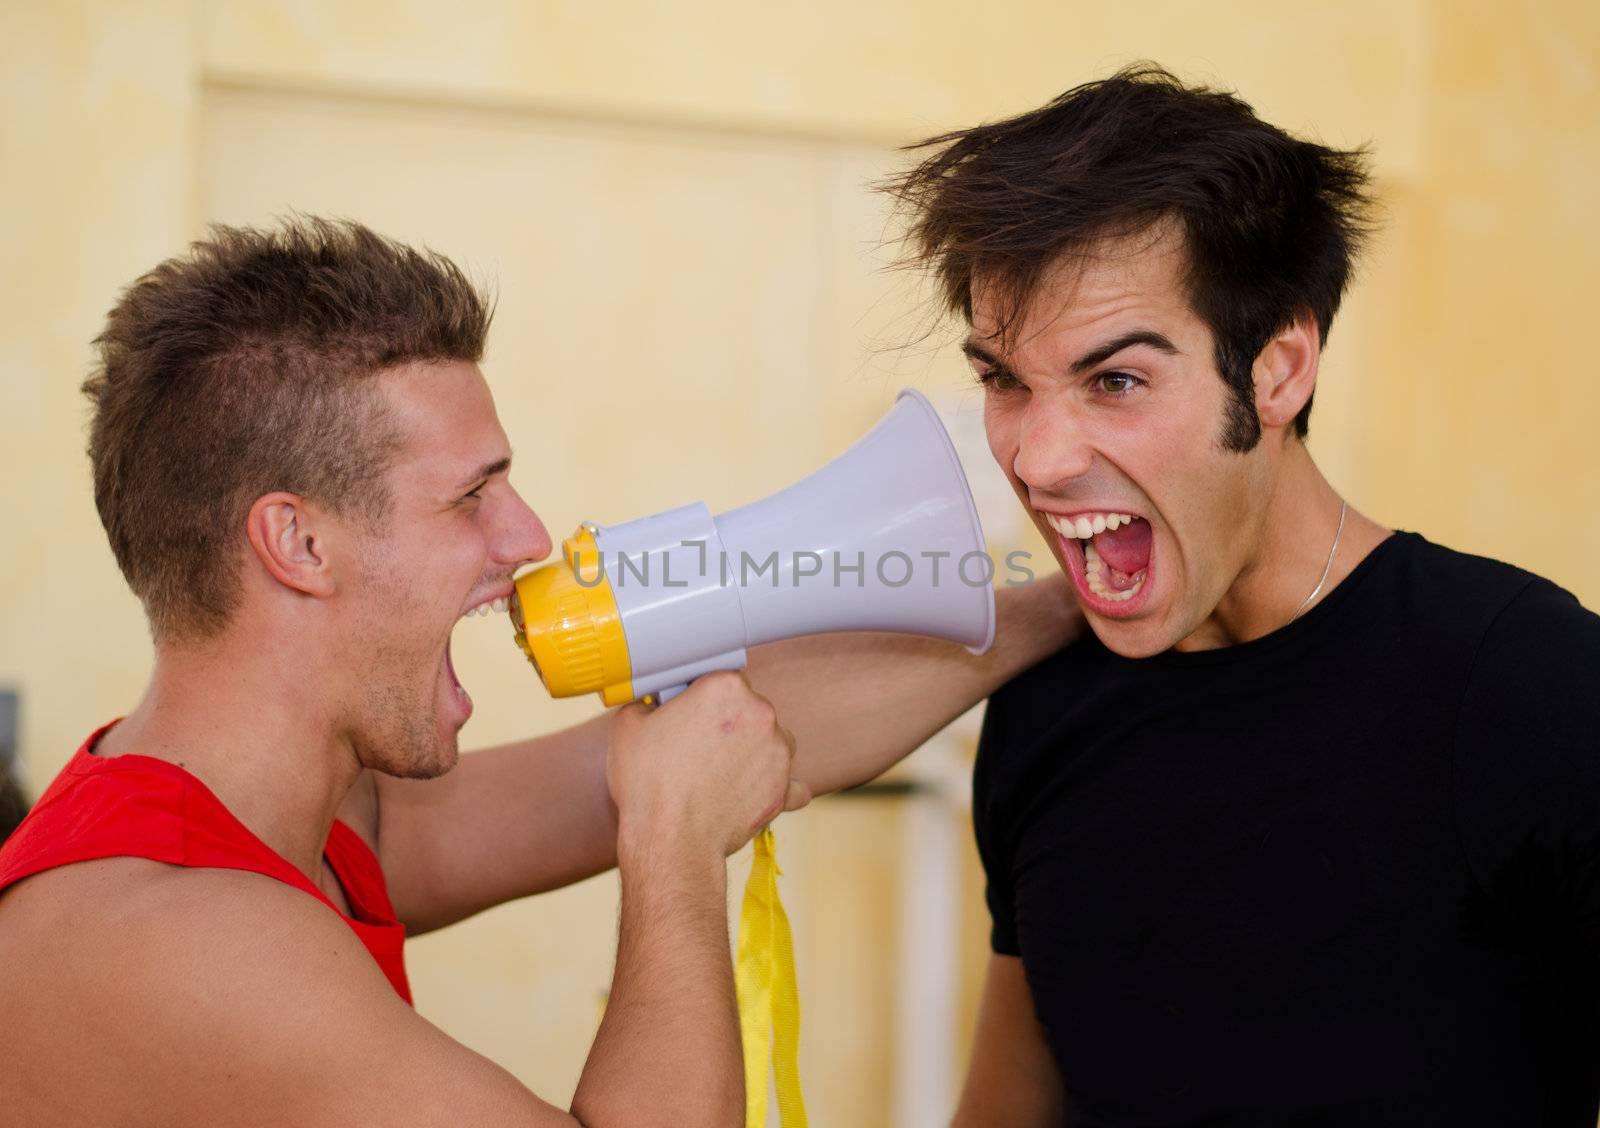 Personal trainer motivating client yelling with megaphone by artofphoto